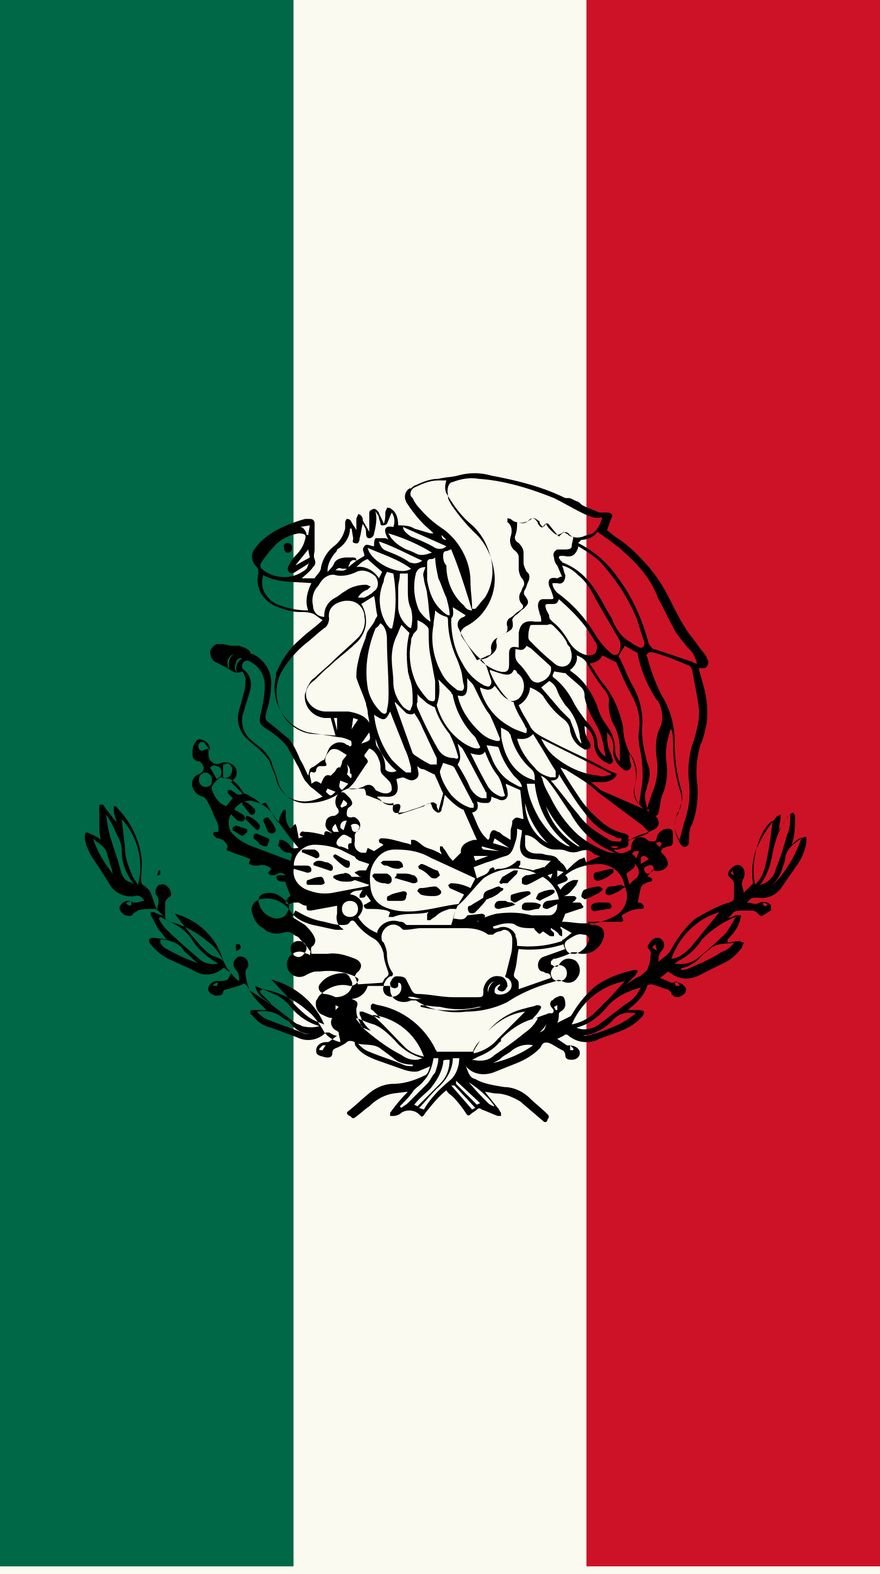 Free Mexico Constitution Day iPhone Background in PDF, Illustrator, PSD, EPS, SVG, PNG, JPEG